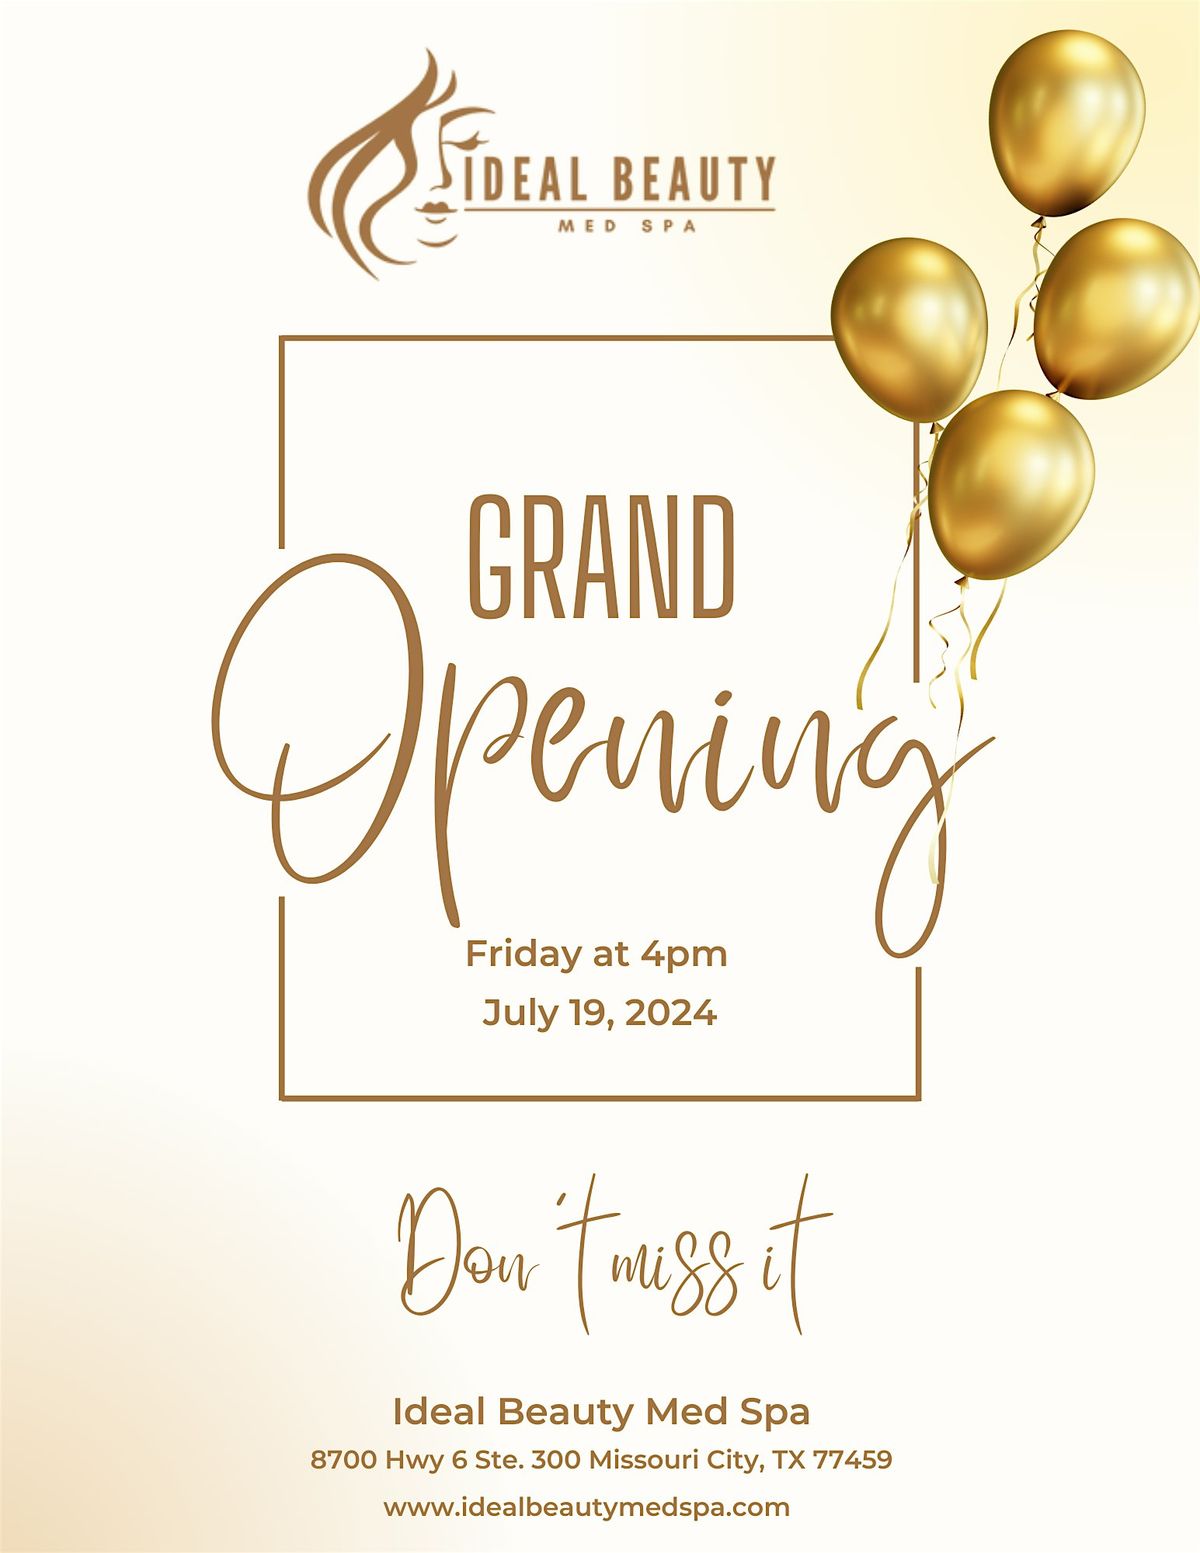 Ideal Beauty Med Spa Grand Opening